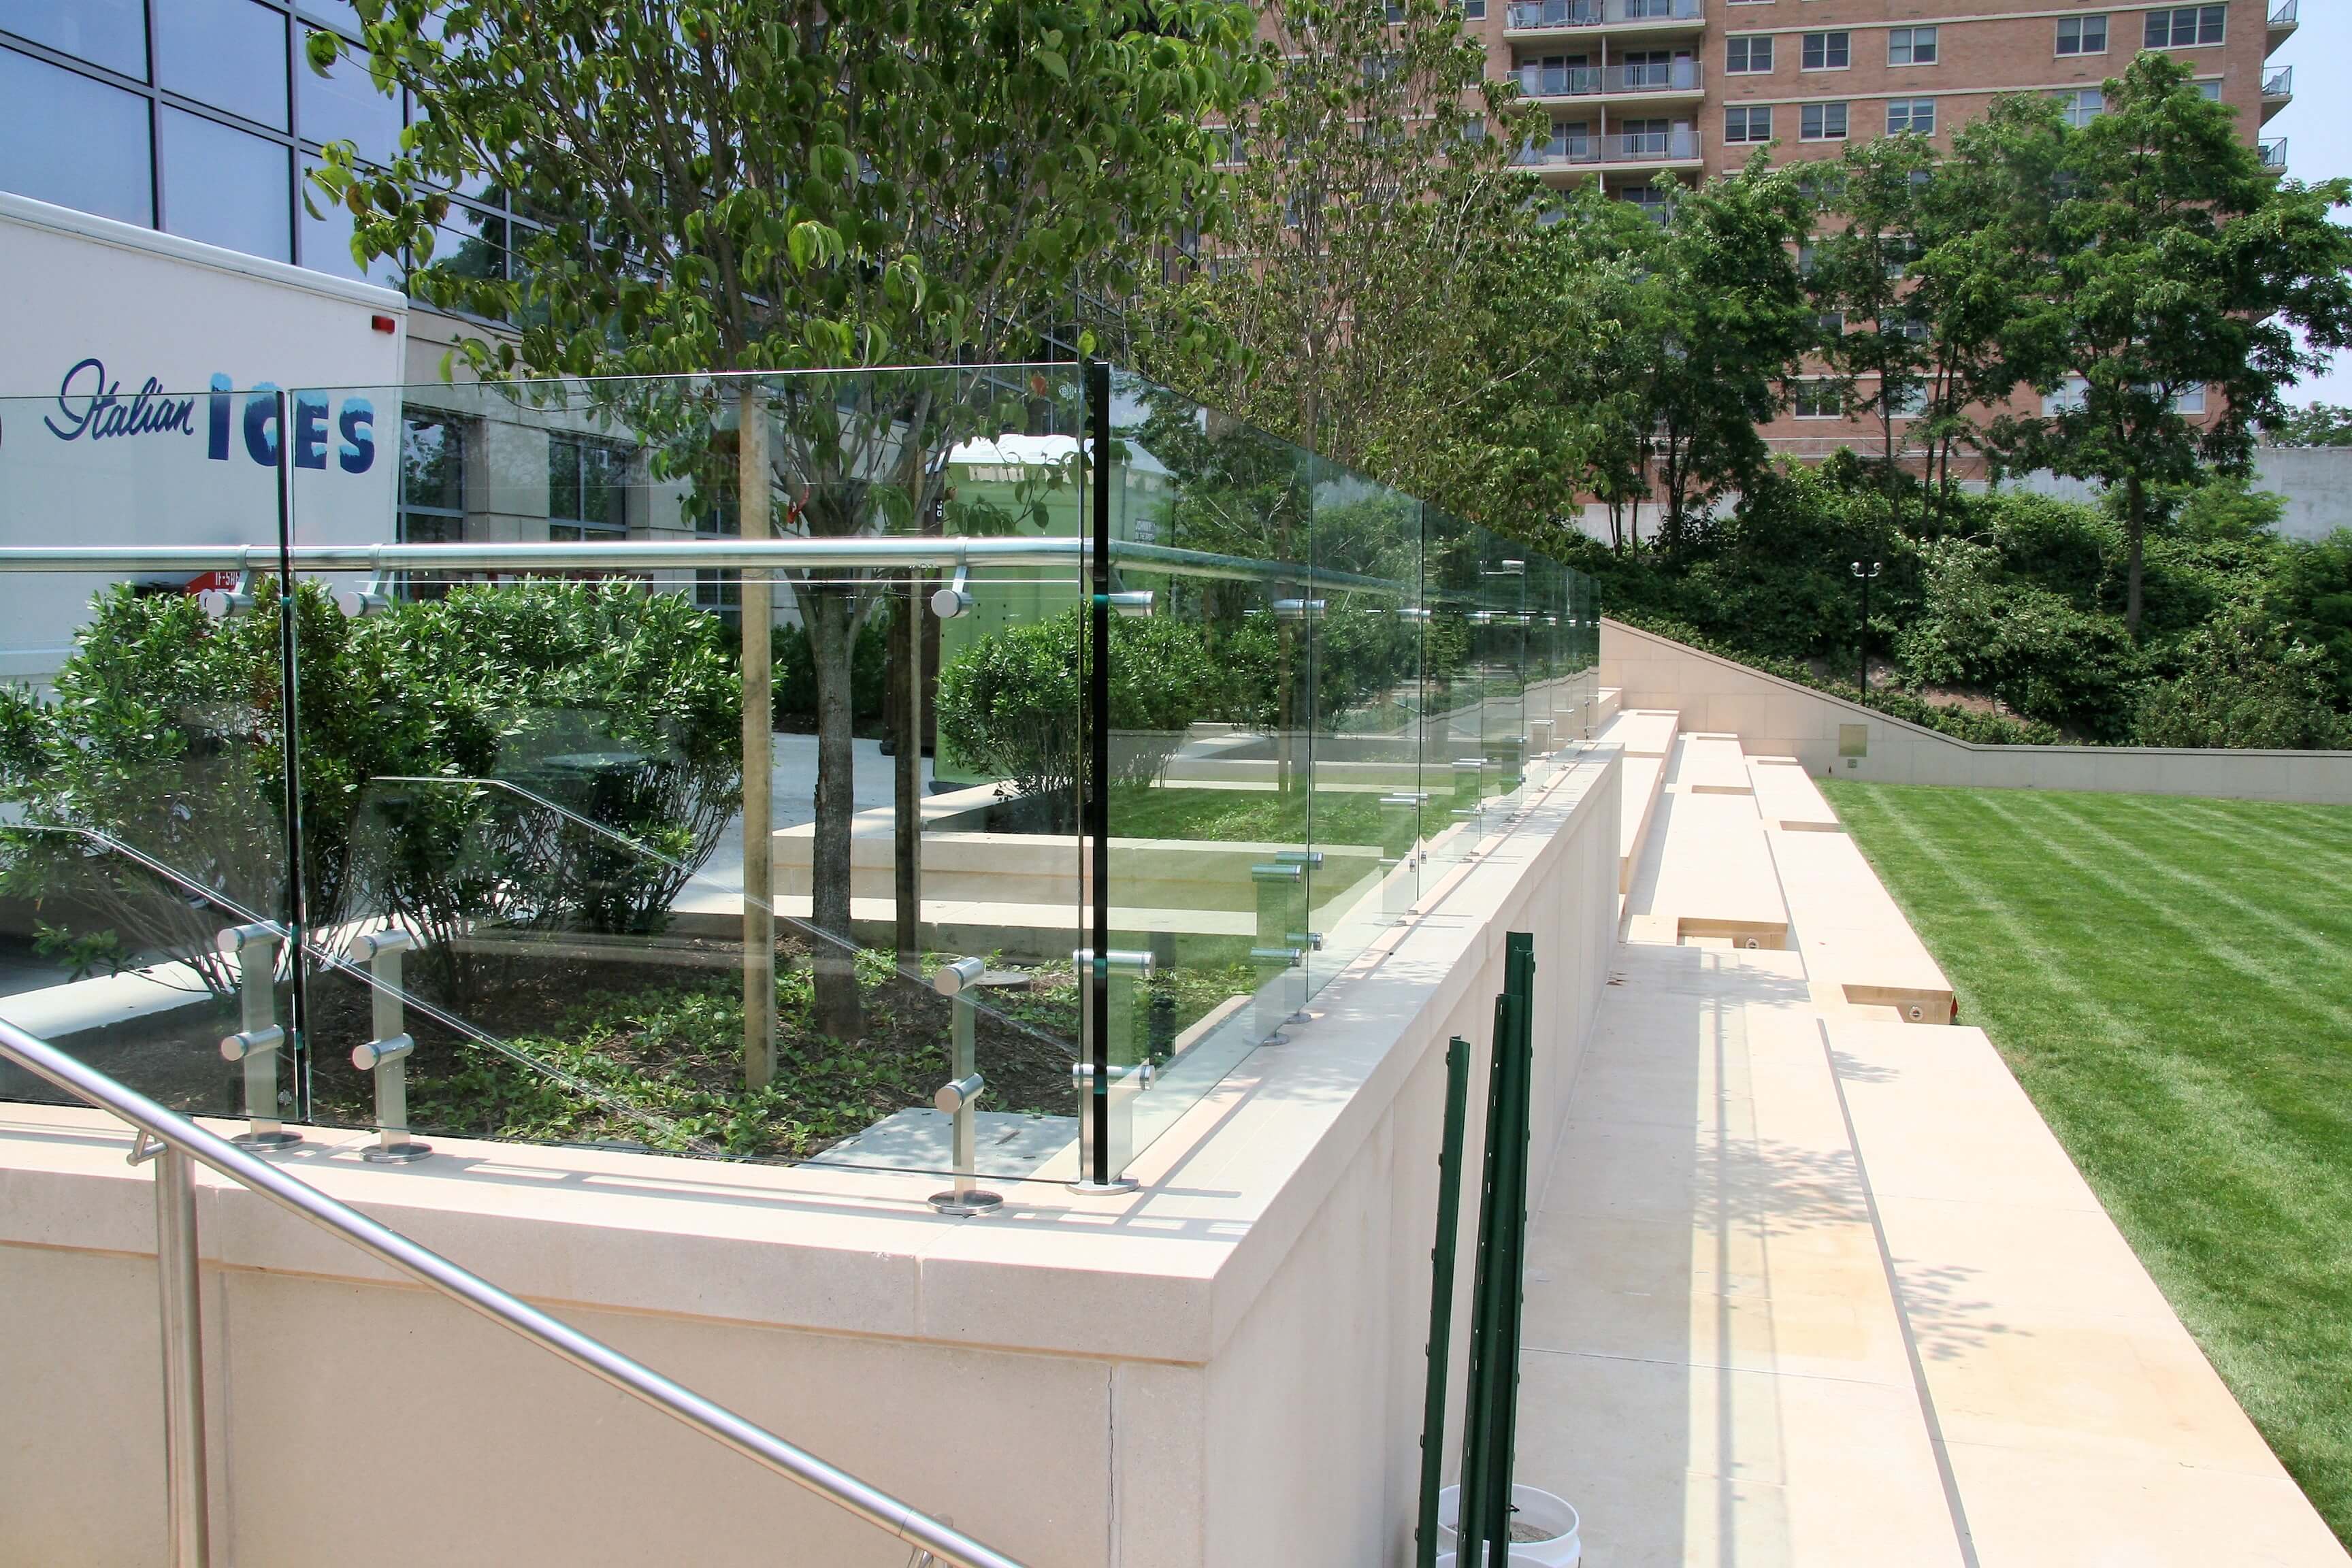 Outdoor balcony view of K Hovnanian HQ, NJ, Kubit short posts with glass infill panels and attached handrail